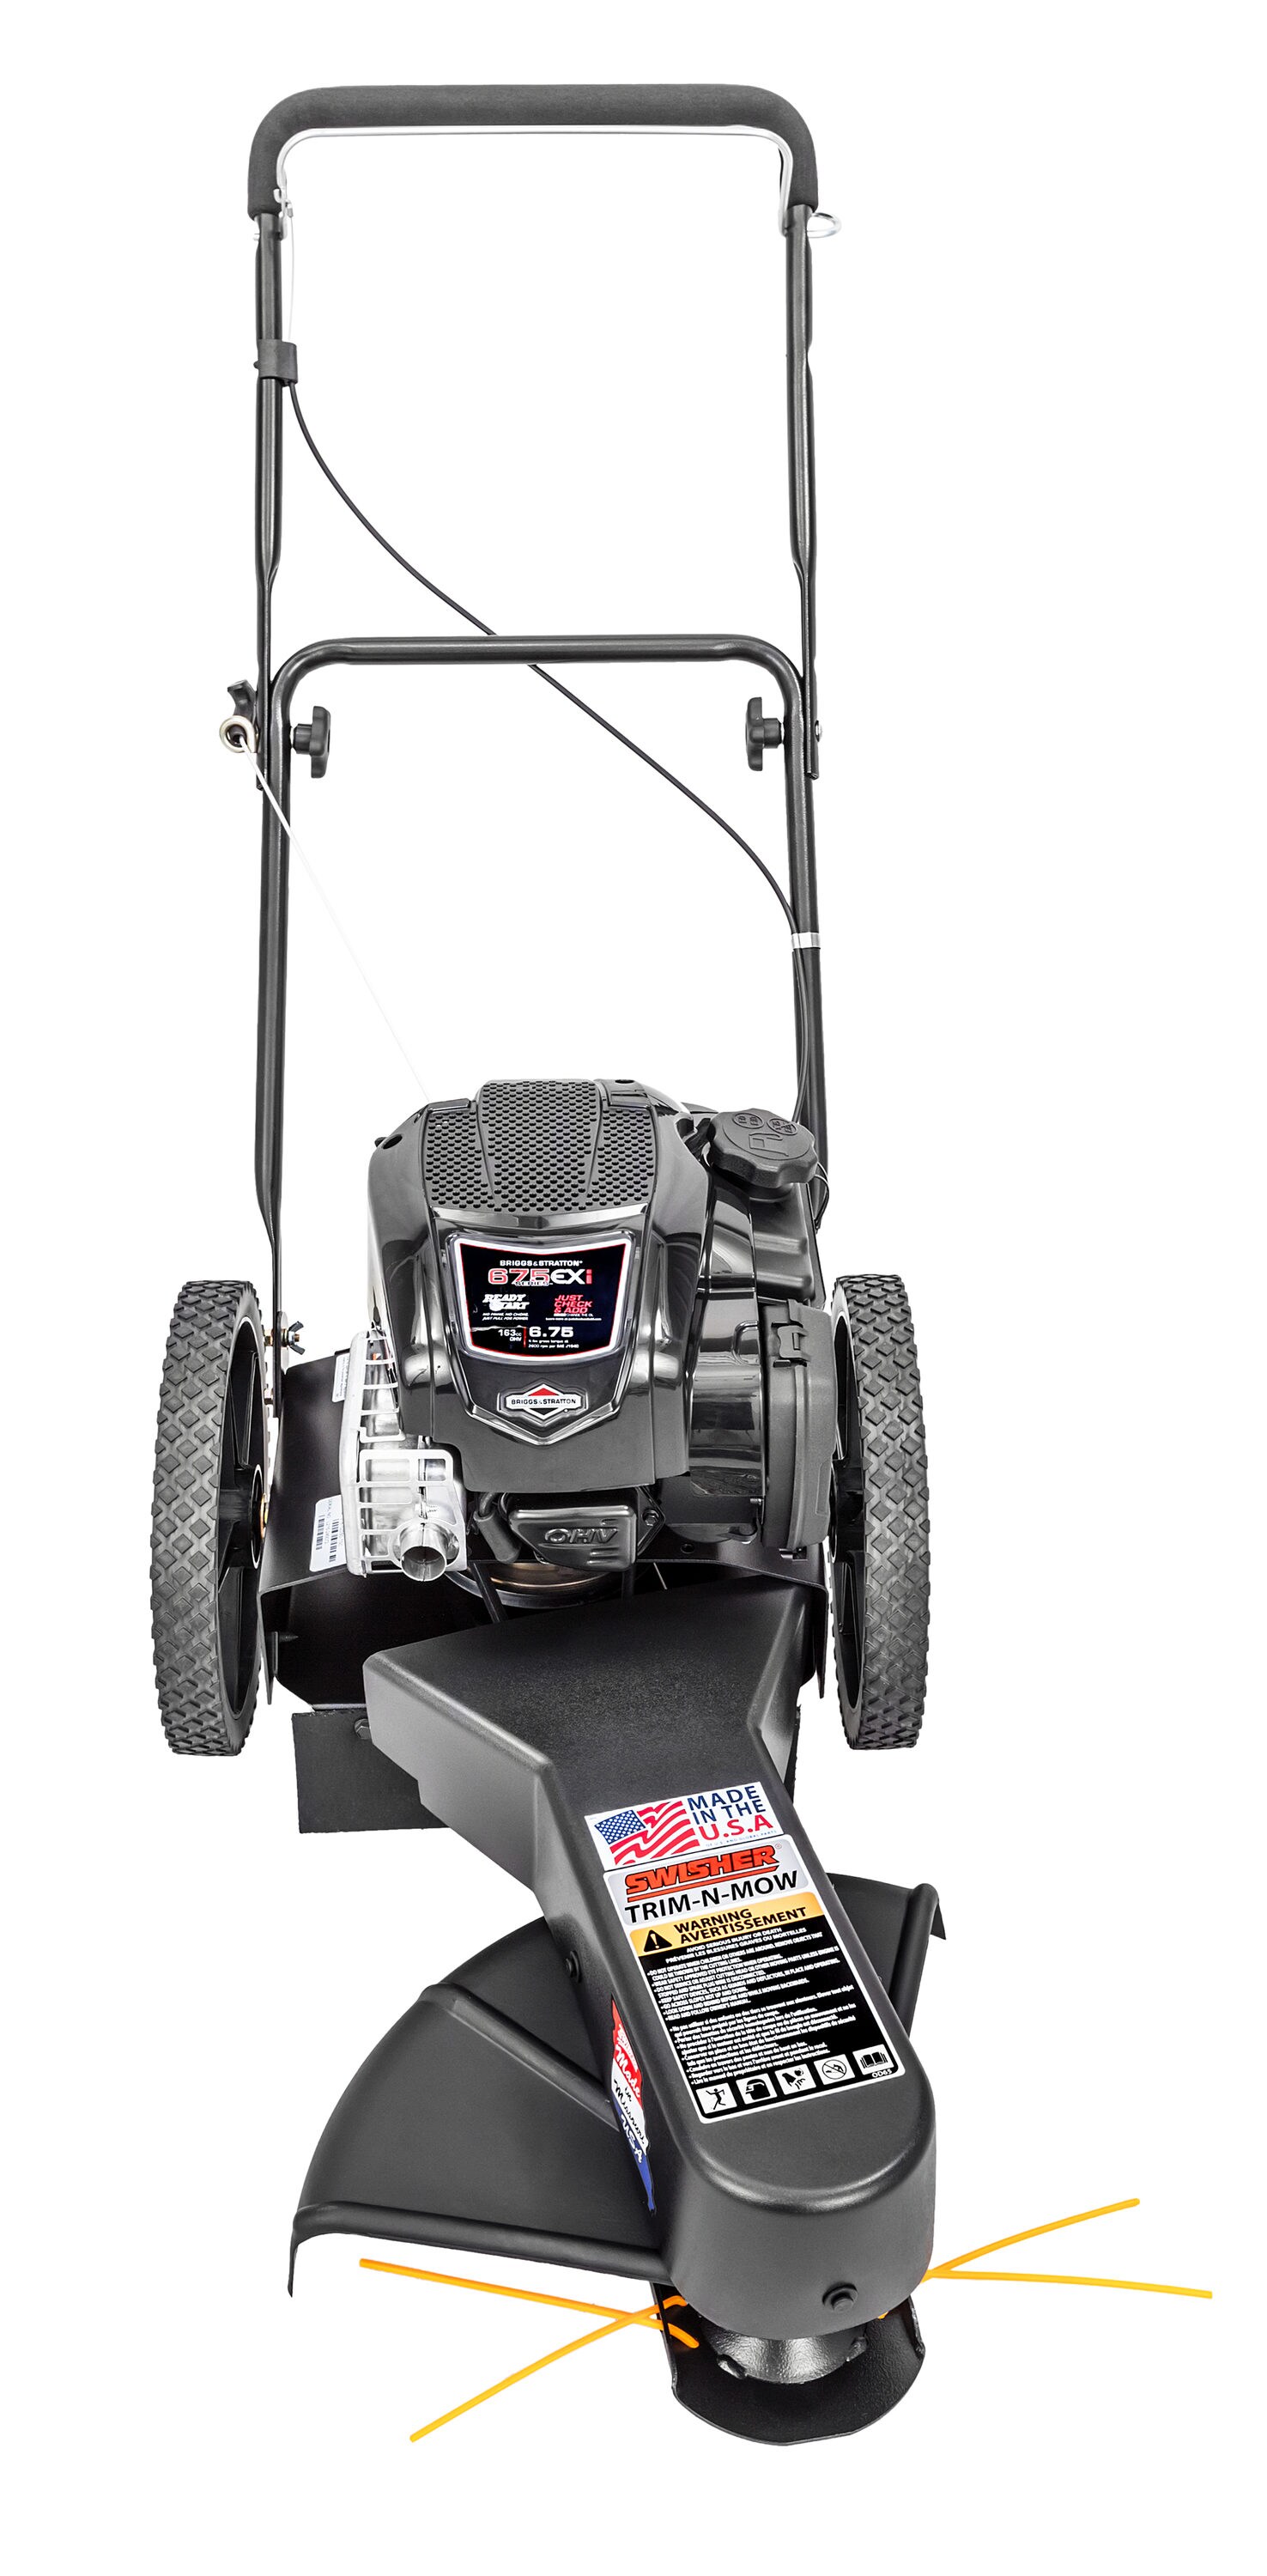 Swisher 163-cc 22-in String Trimmer Mower in the String Trimmer Mowers